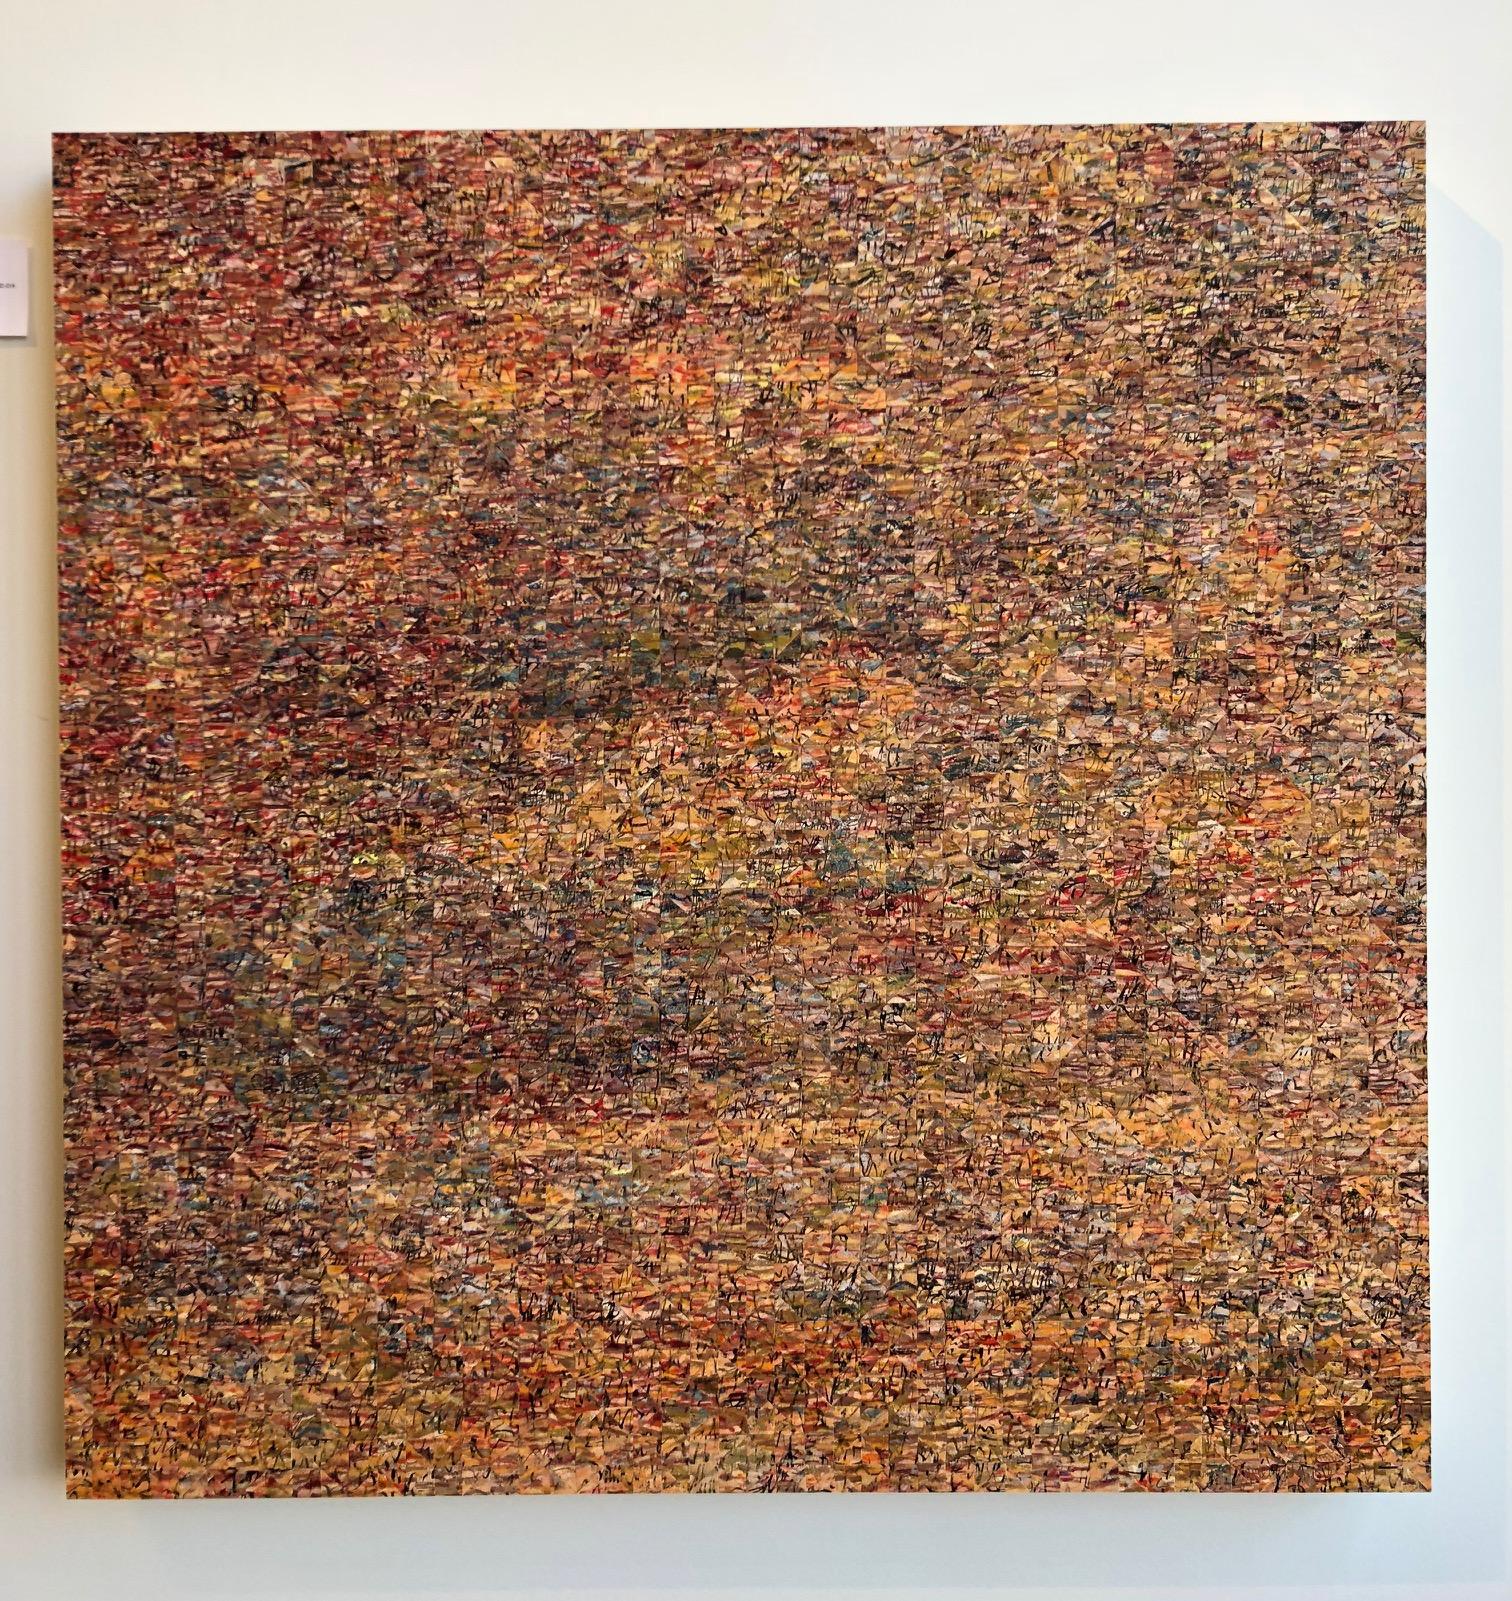 Umbra / mosaic watercolor painting on wood - Brown Abstract Drawing by Irene Zweig